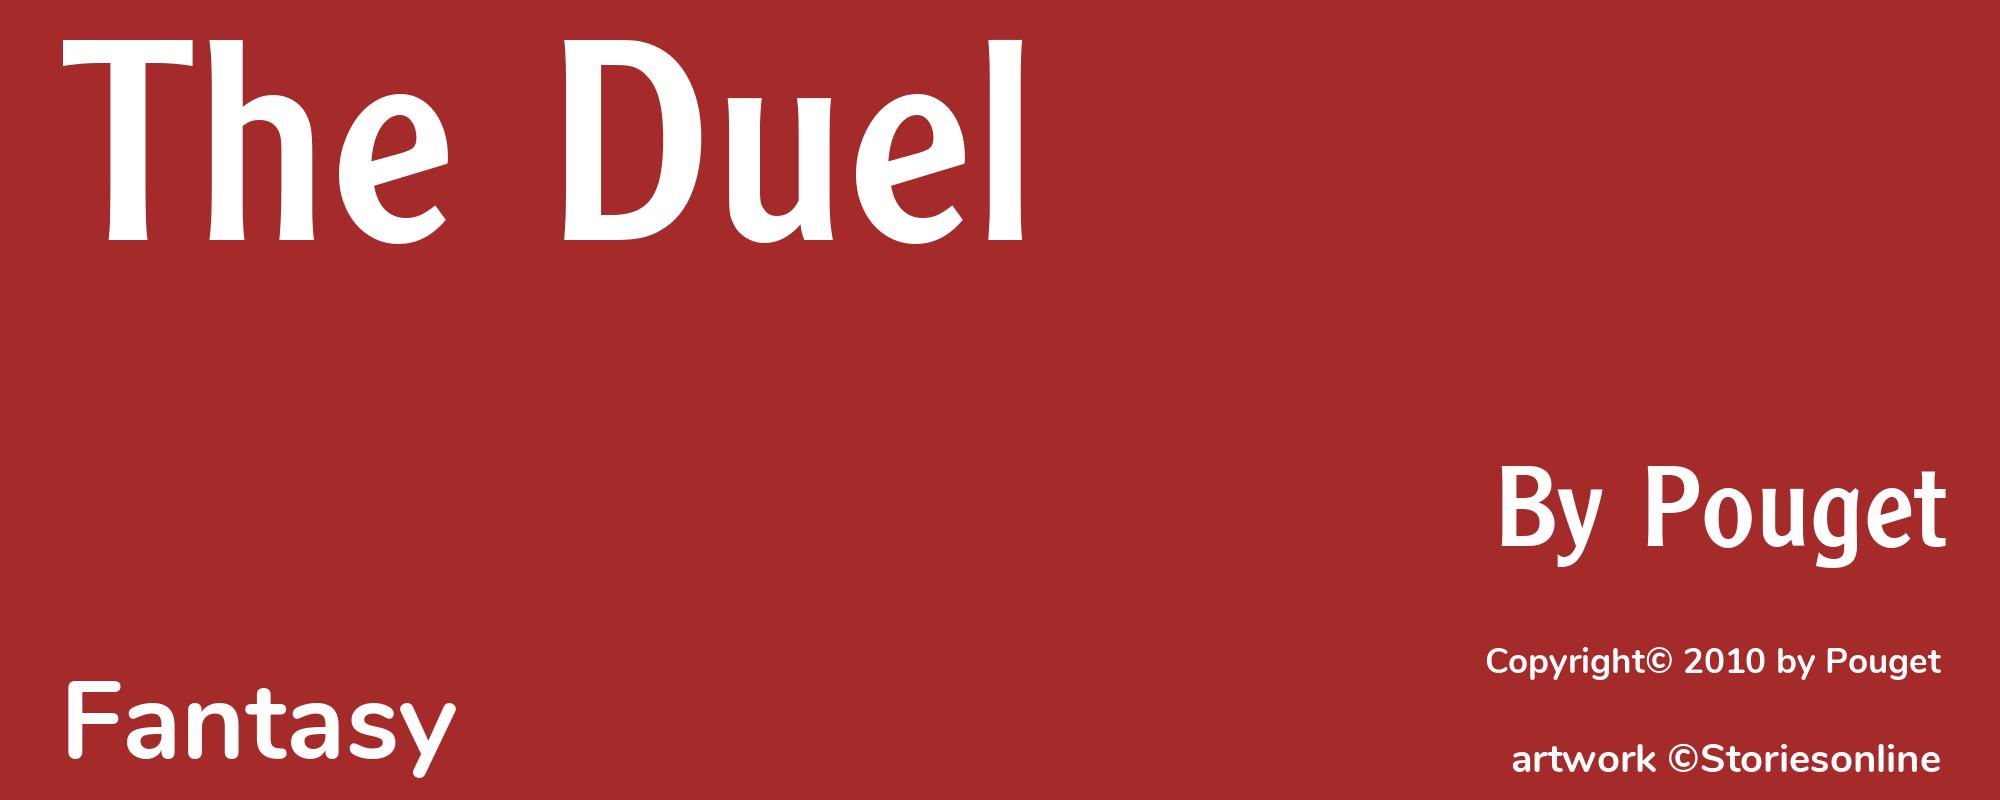 The Duel - Cover